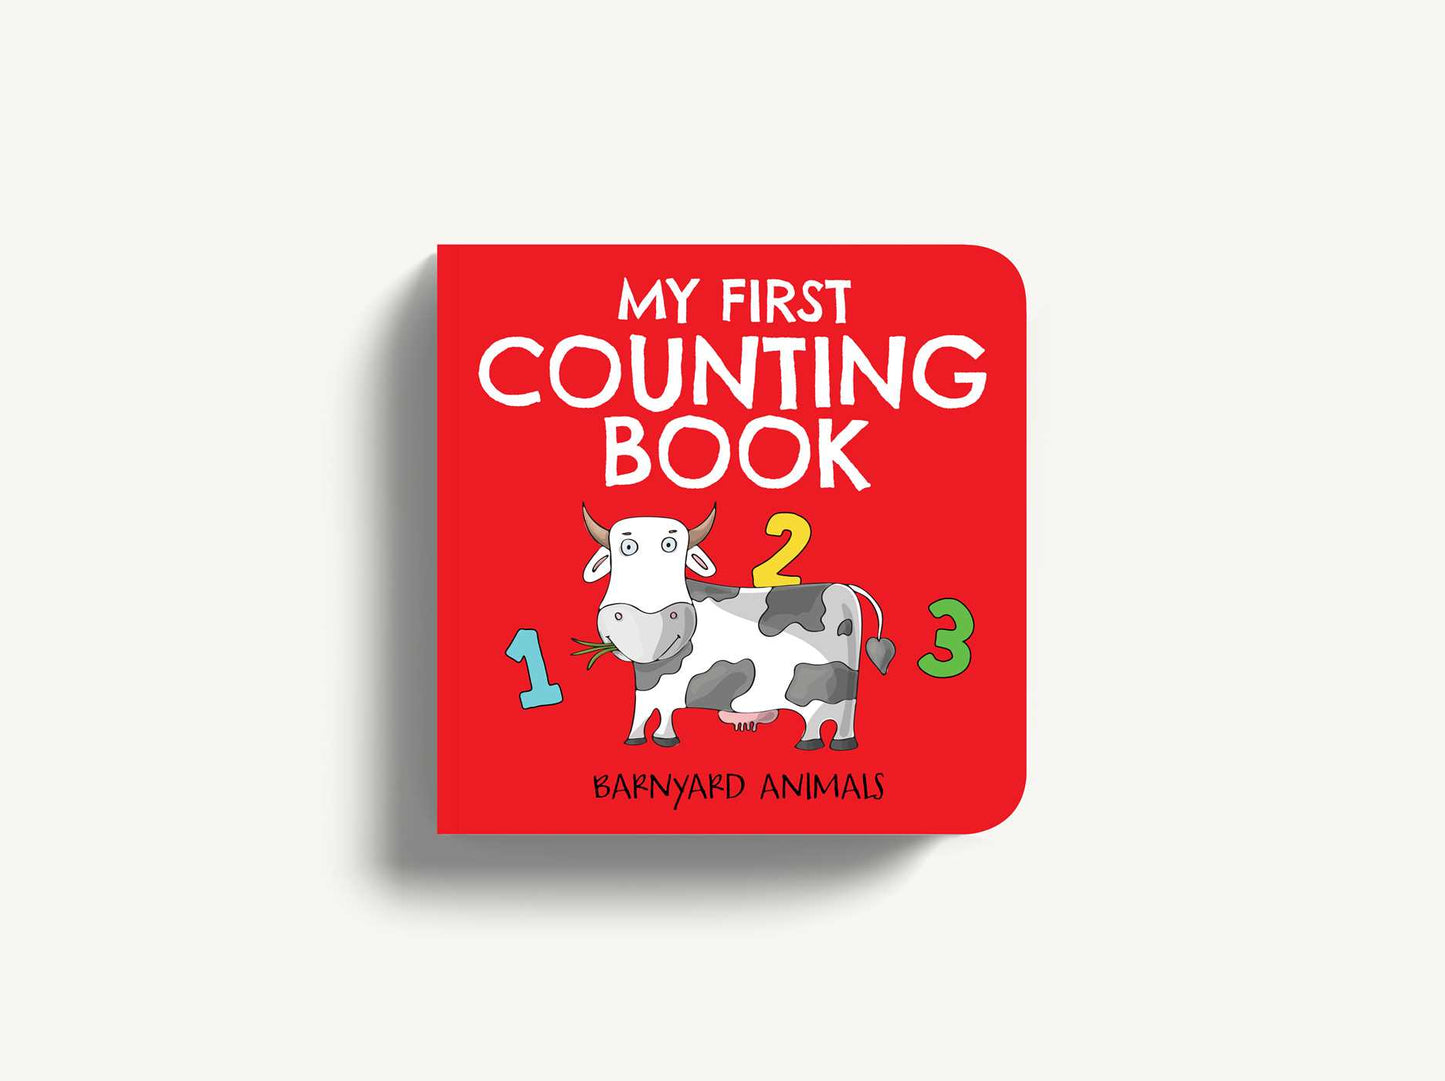 My First Counting Book: Barnyard Animals: Counting 1 to 10